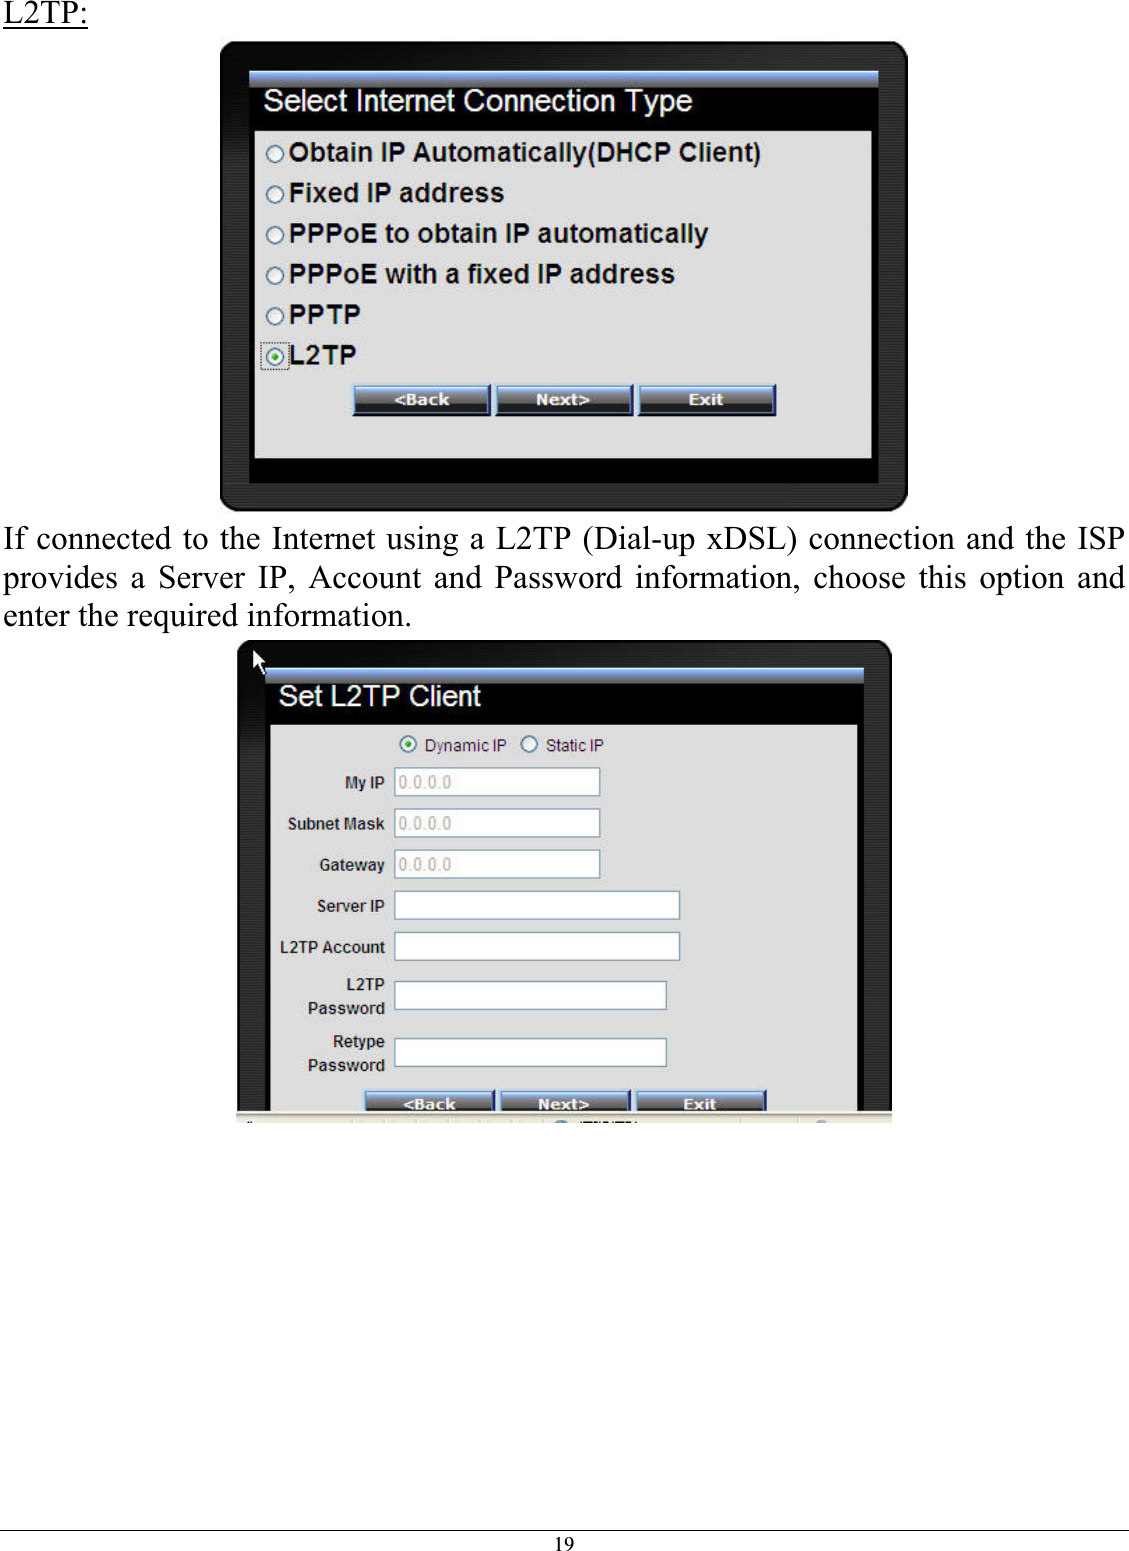 19L2TP:If connected to the Internet using a L2TP (Dial-up xDSL) connection and the ISP provides a Server IP, Account and Password information, choose this option and enter the required information. 